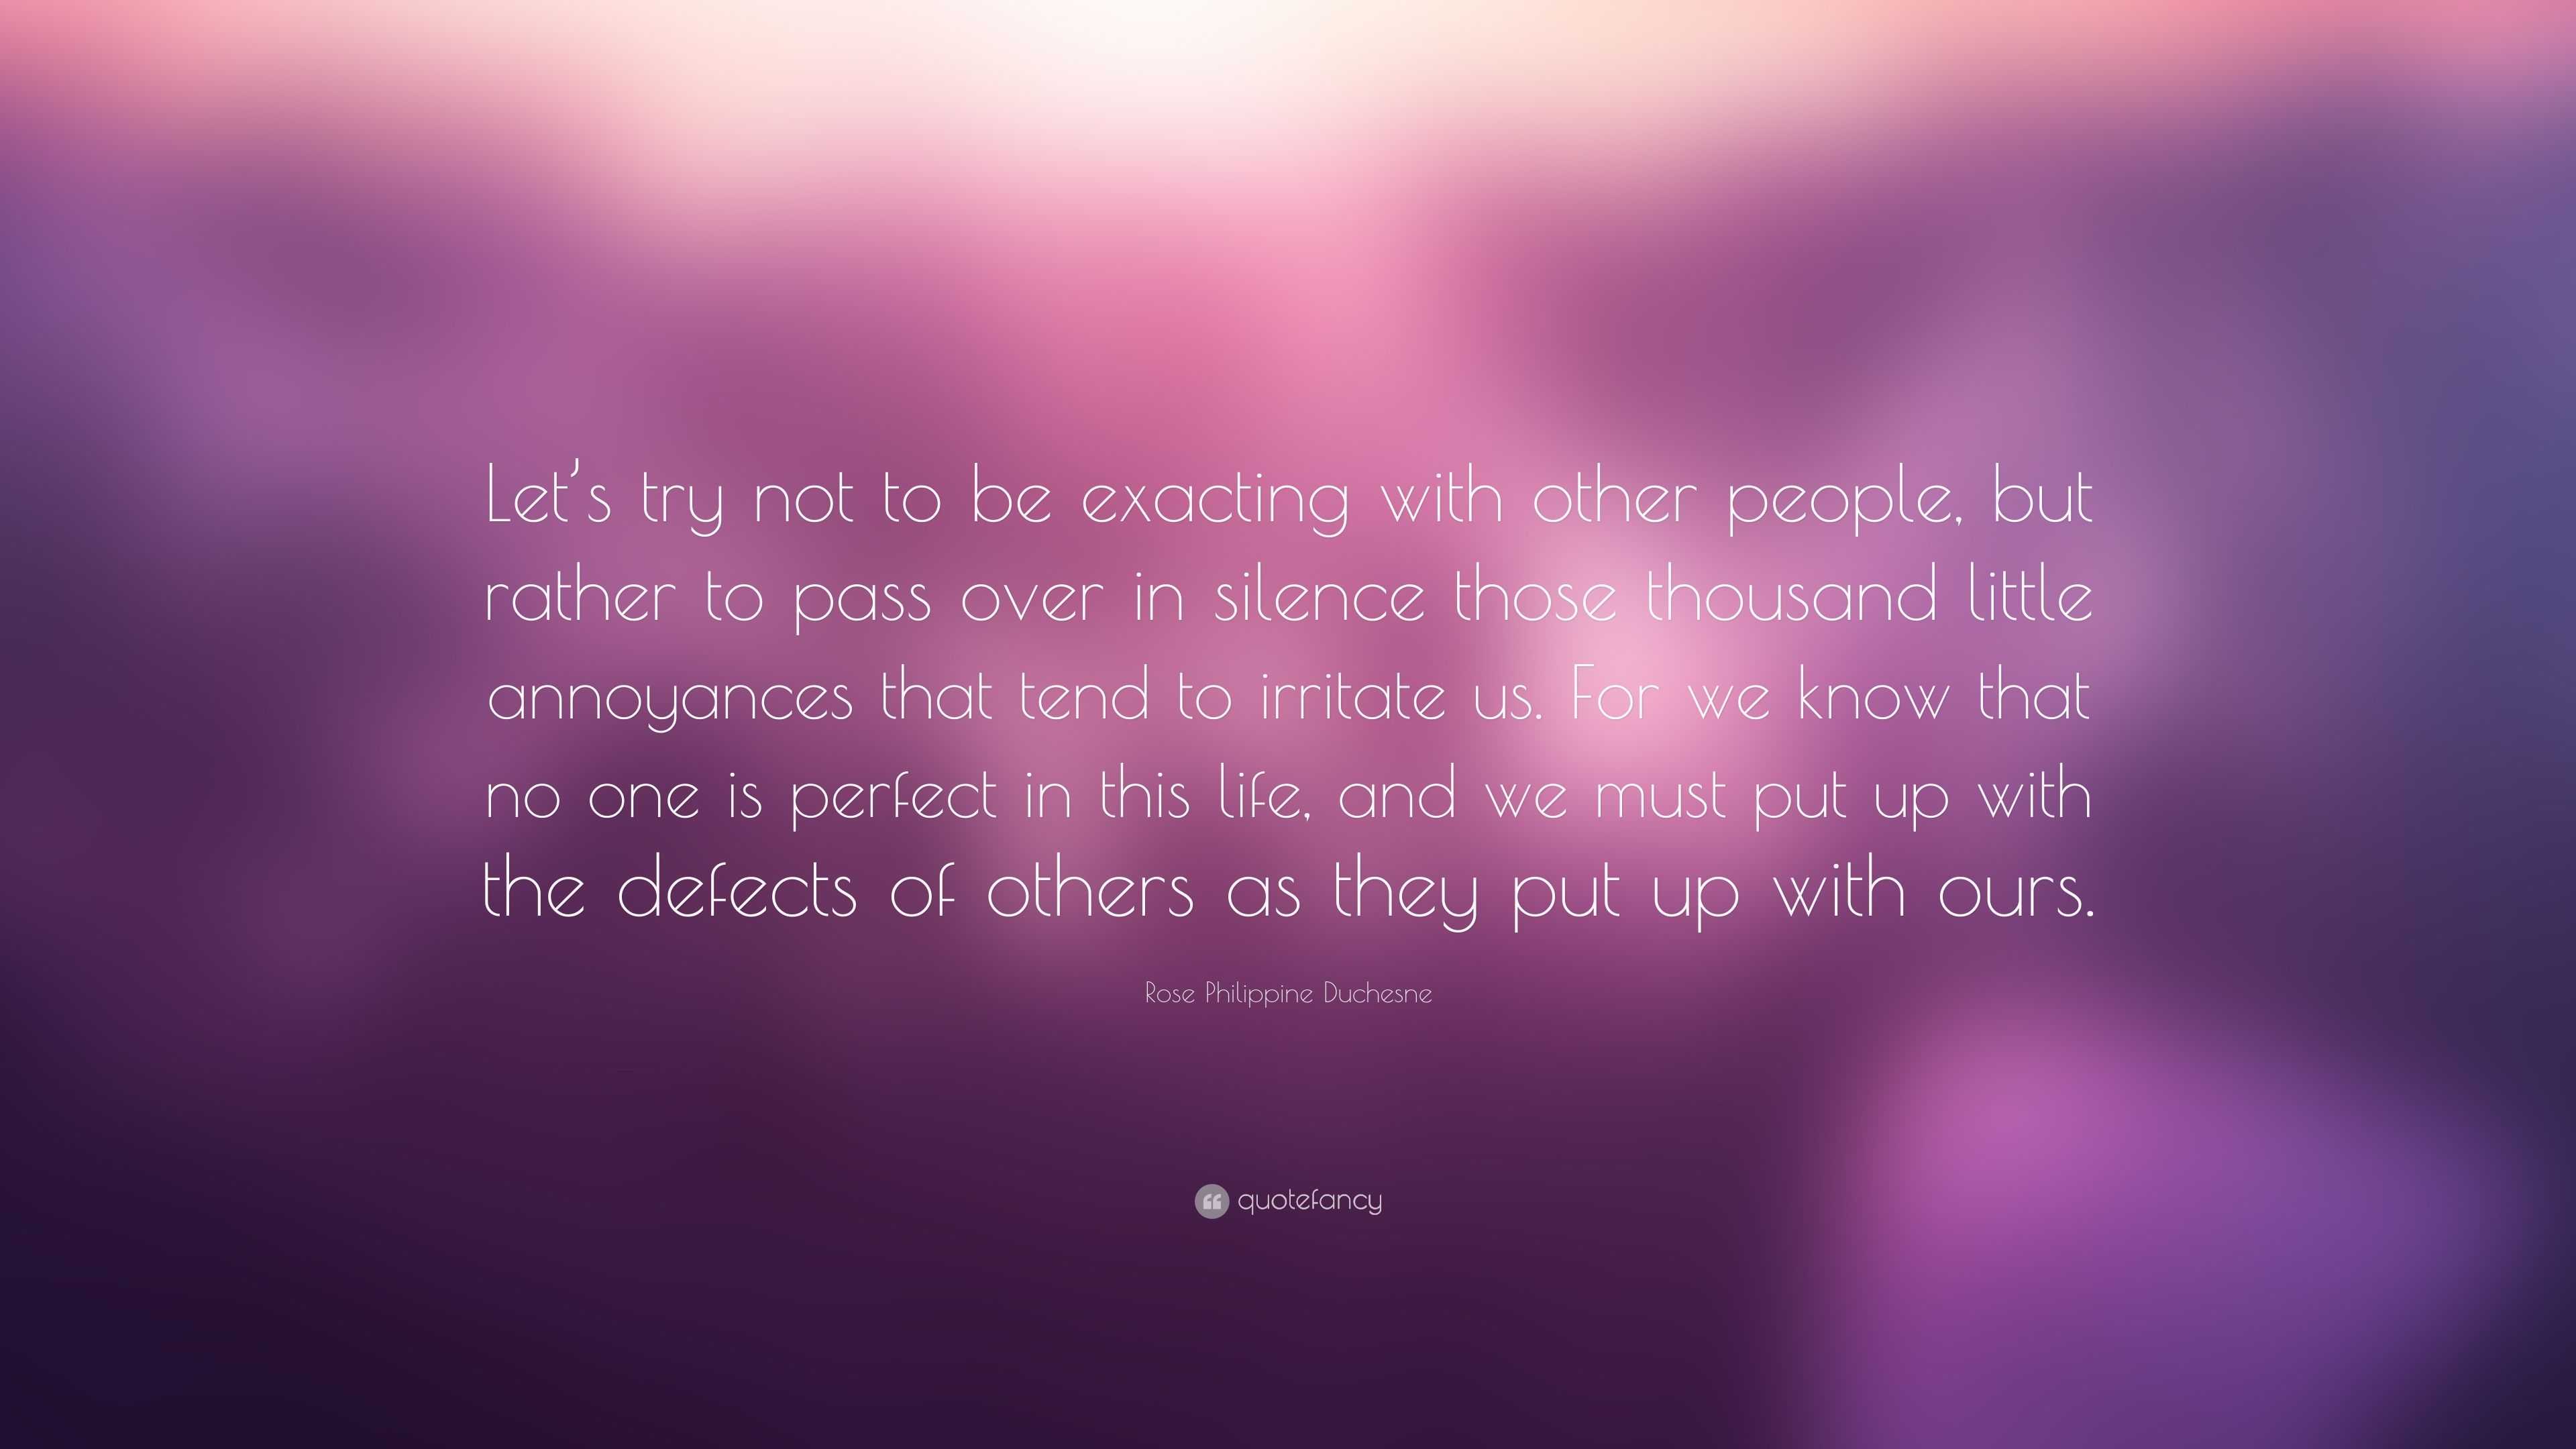 Rose Philippine Duchesne Quote: “Let’s try not to be exacting with ...